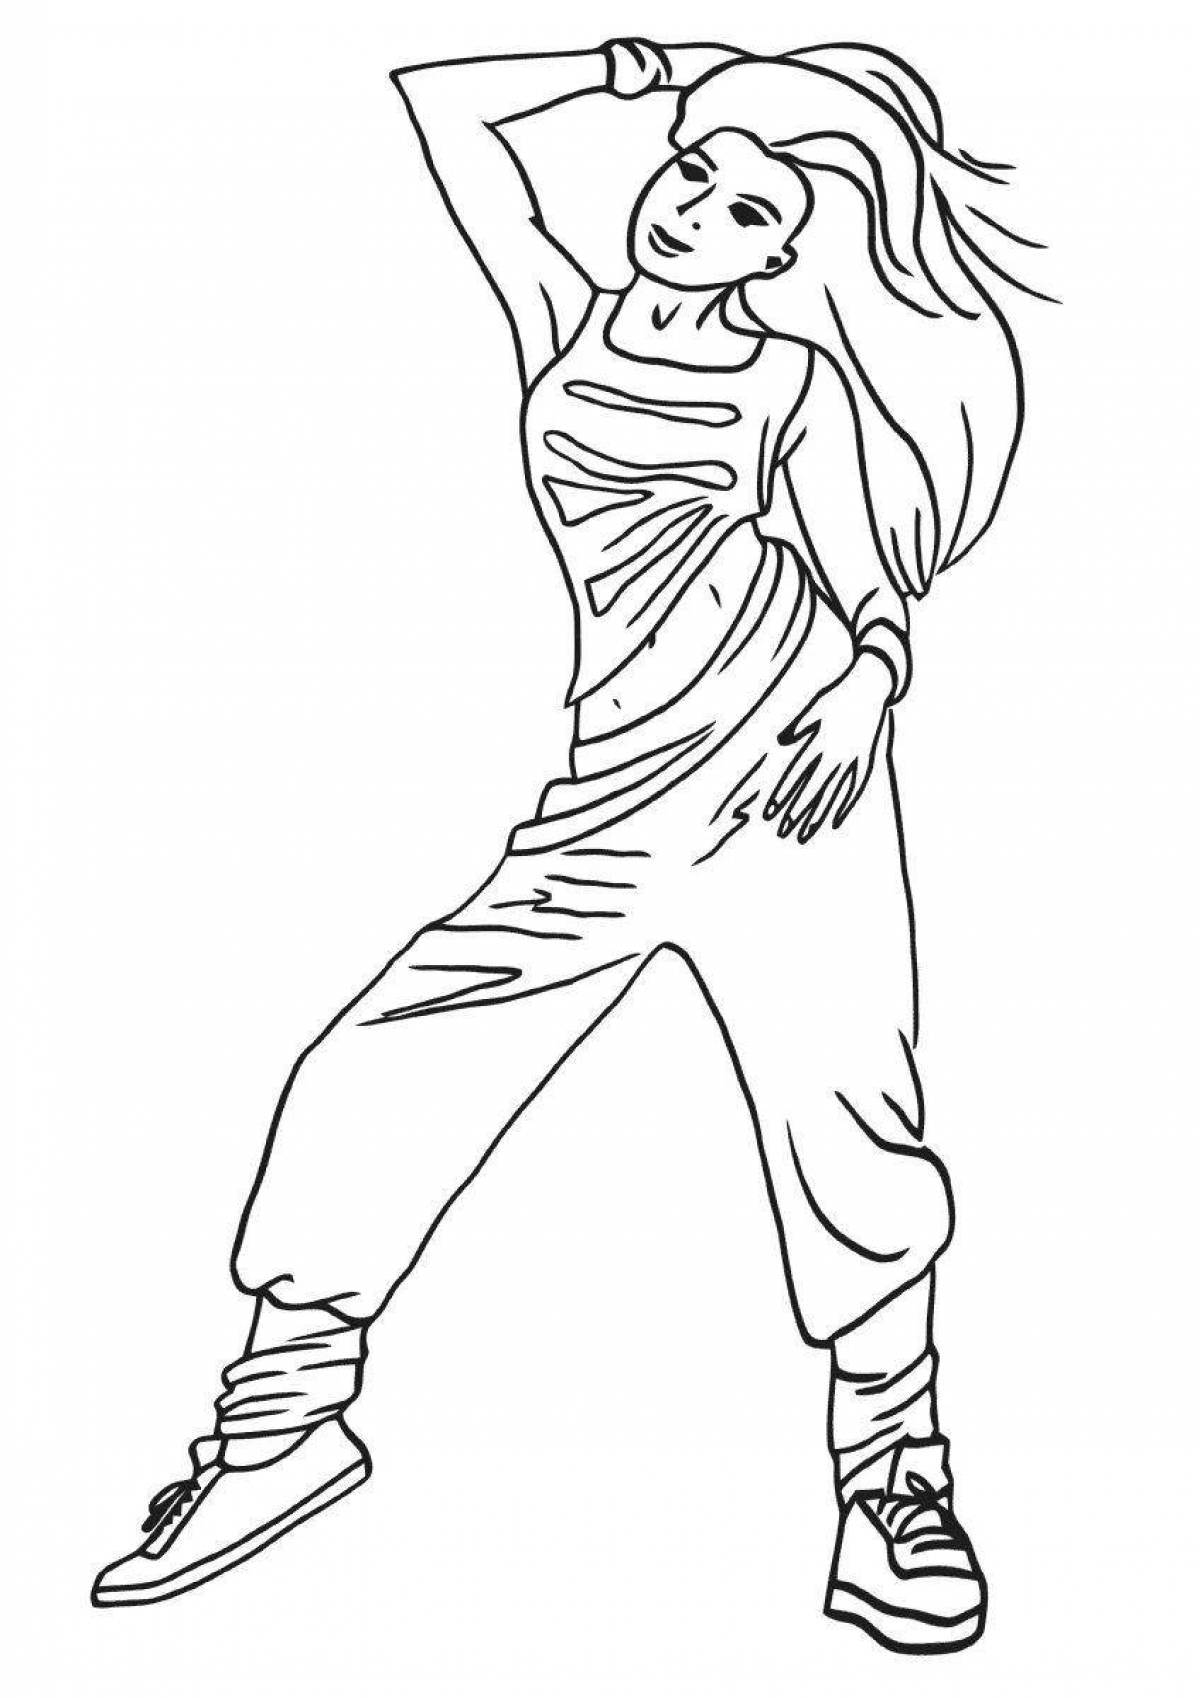 Coloring page balanced dancer